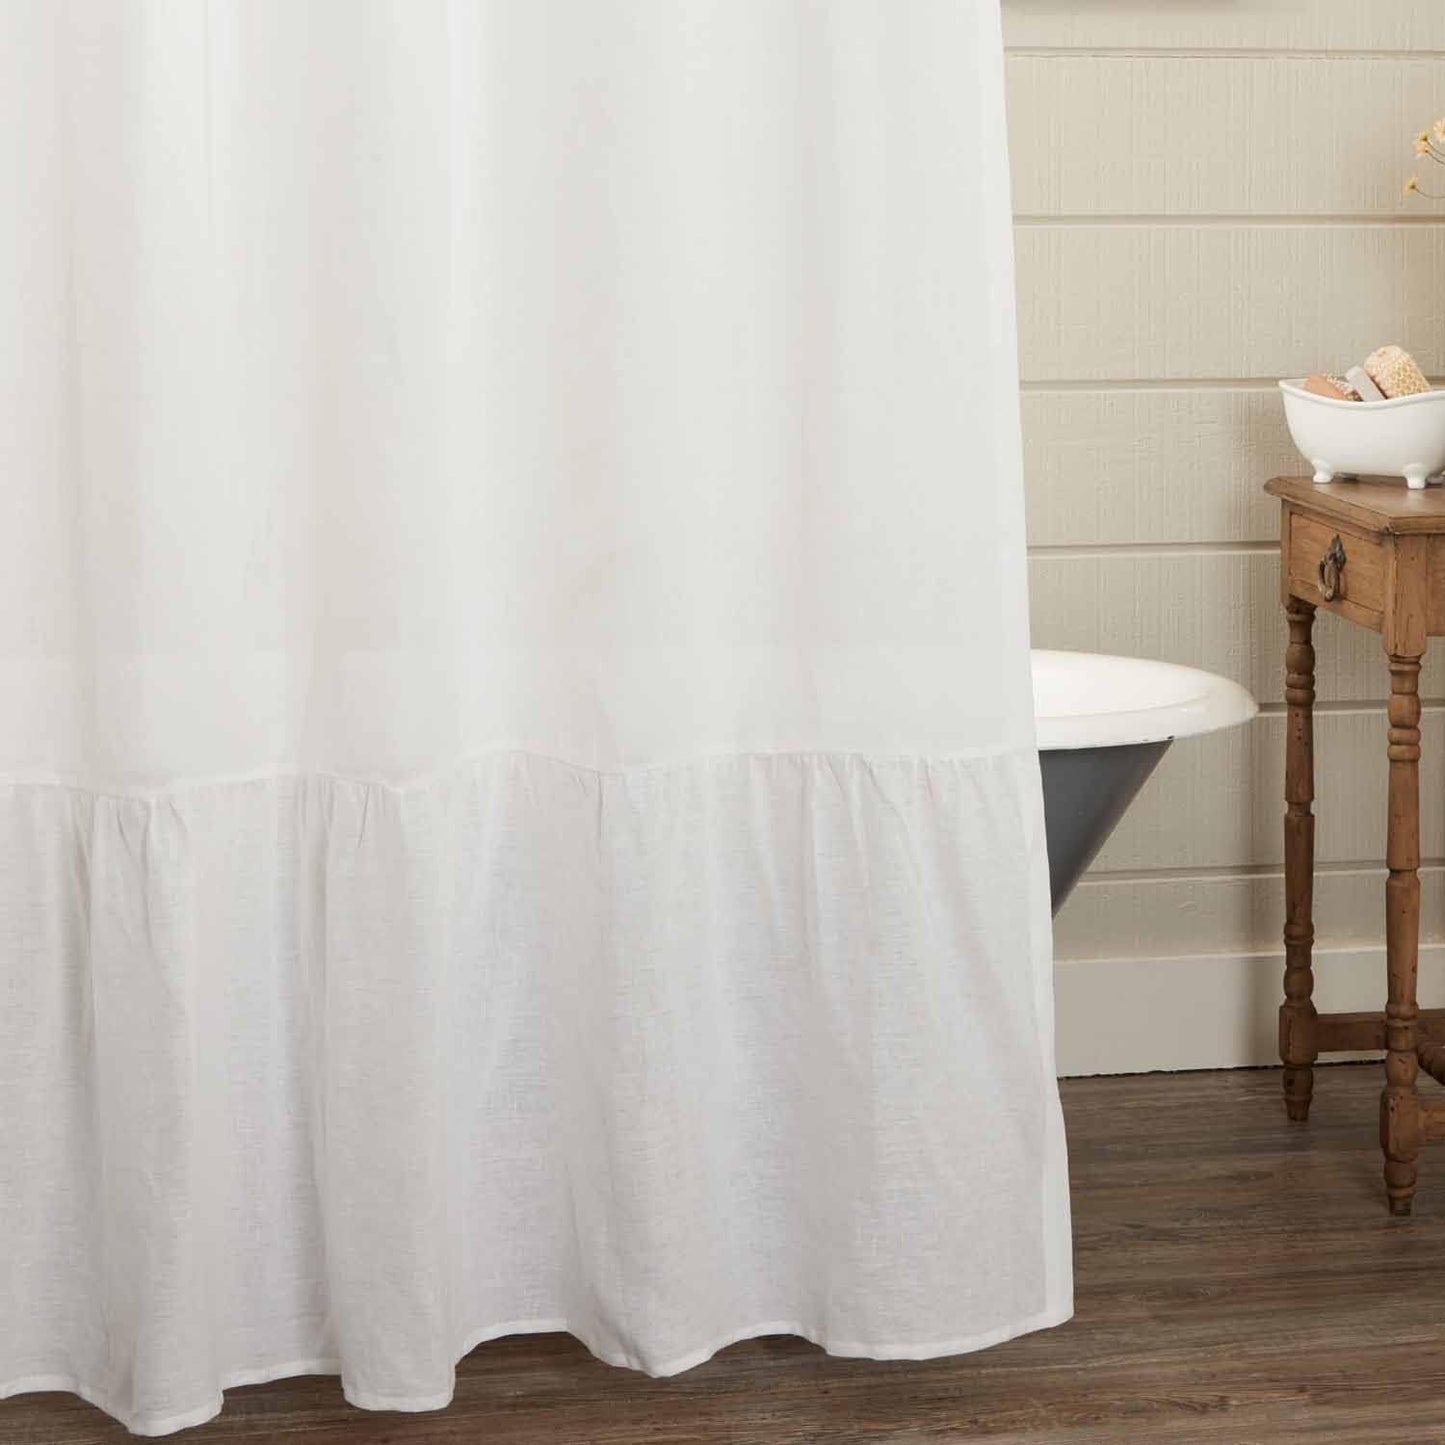 Piper Classics Provincial Linen White Ruffled Panel Curtains, Set of 2 Panels, 84" Long X 40" W, 100% Linen Drapes  Piper Classics Shower Curtain  